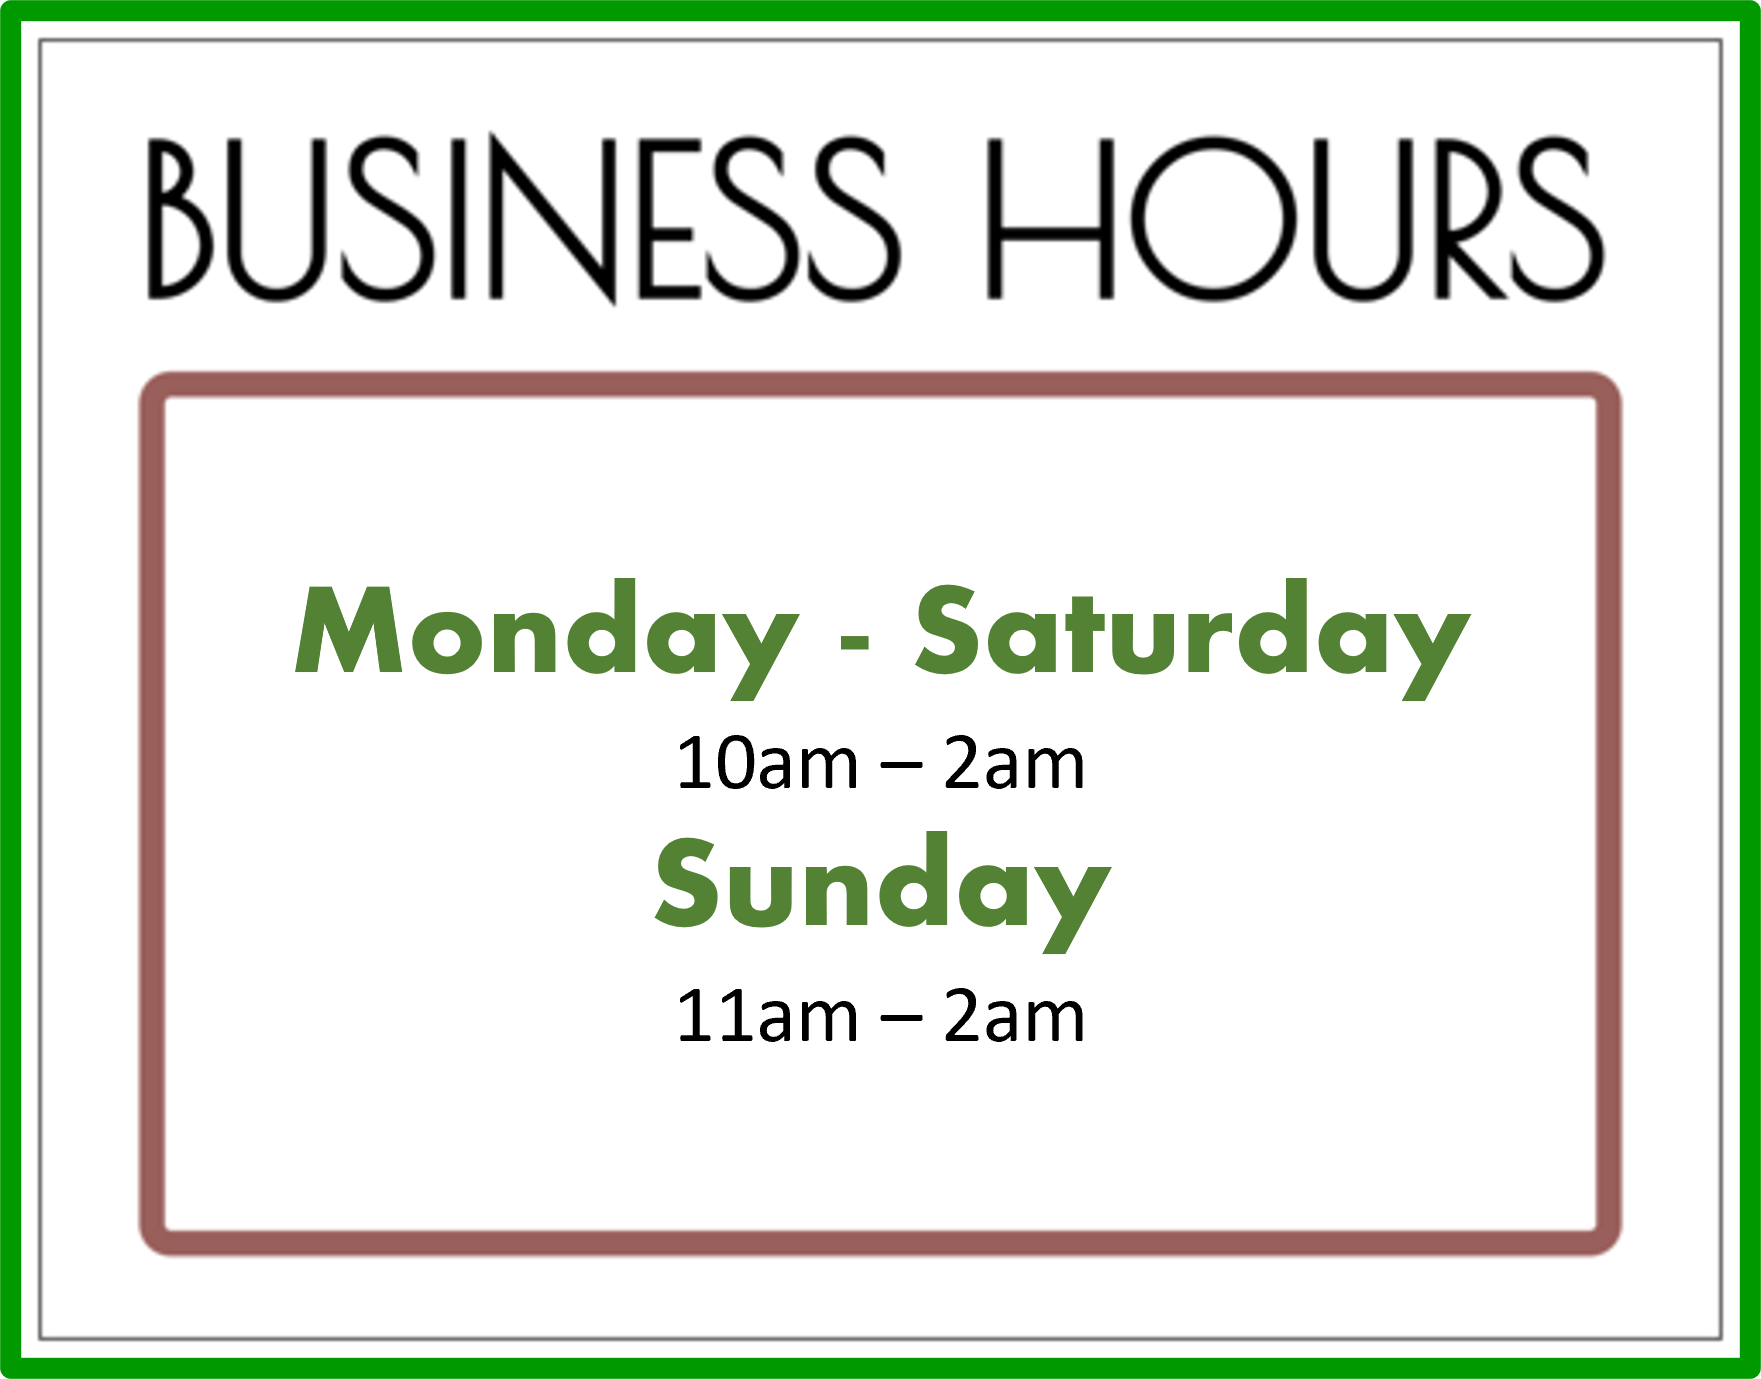 business hours mill lane tavern